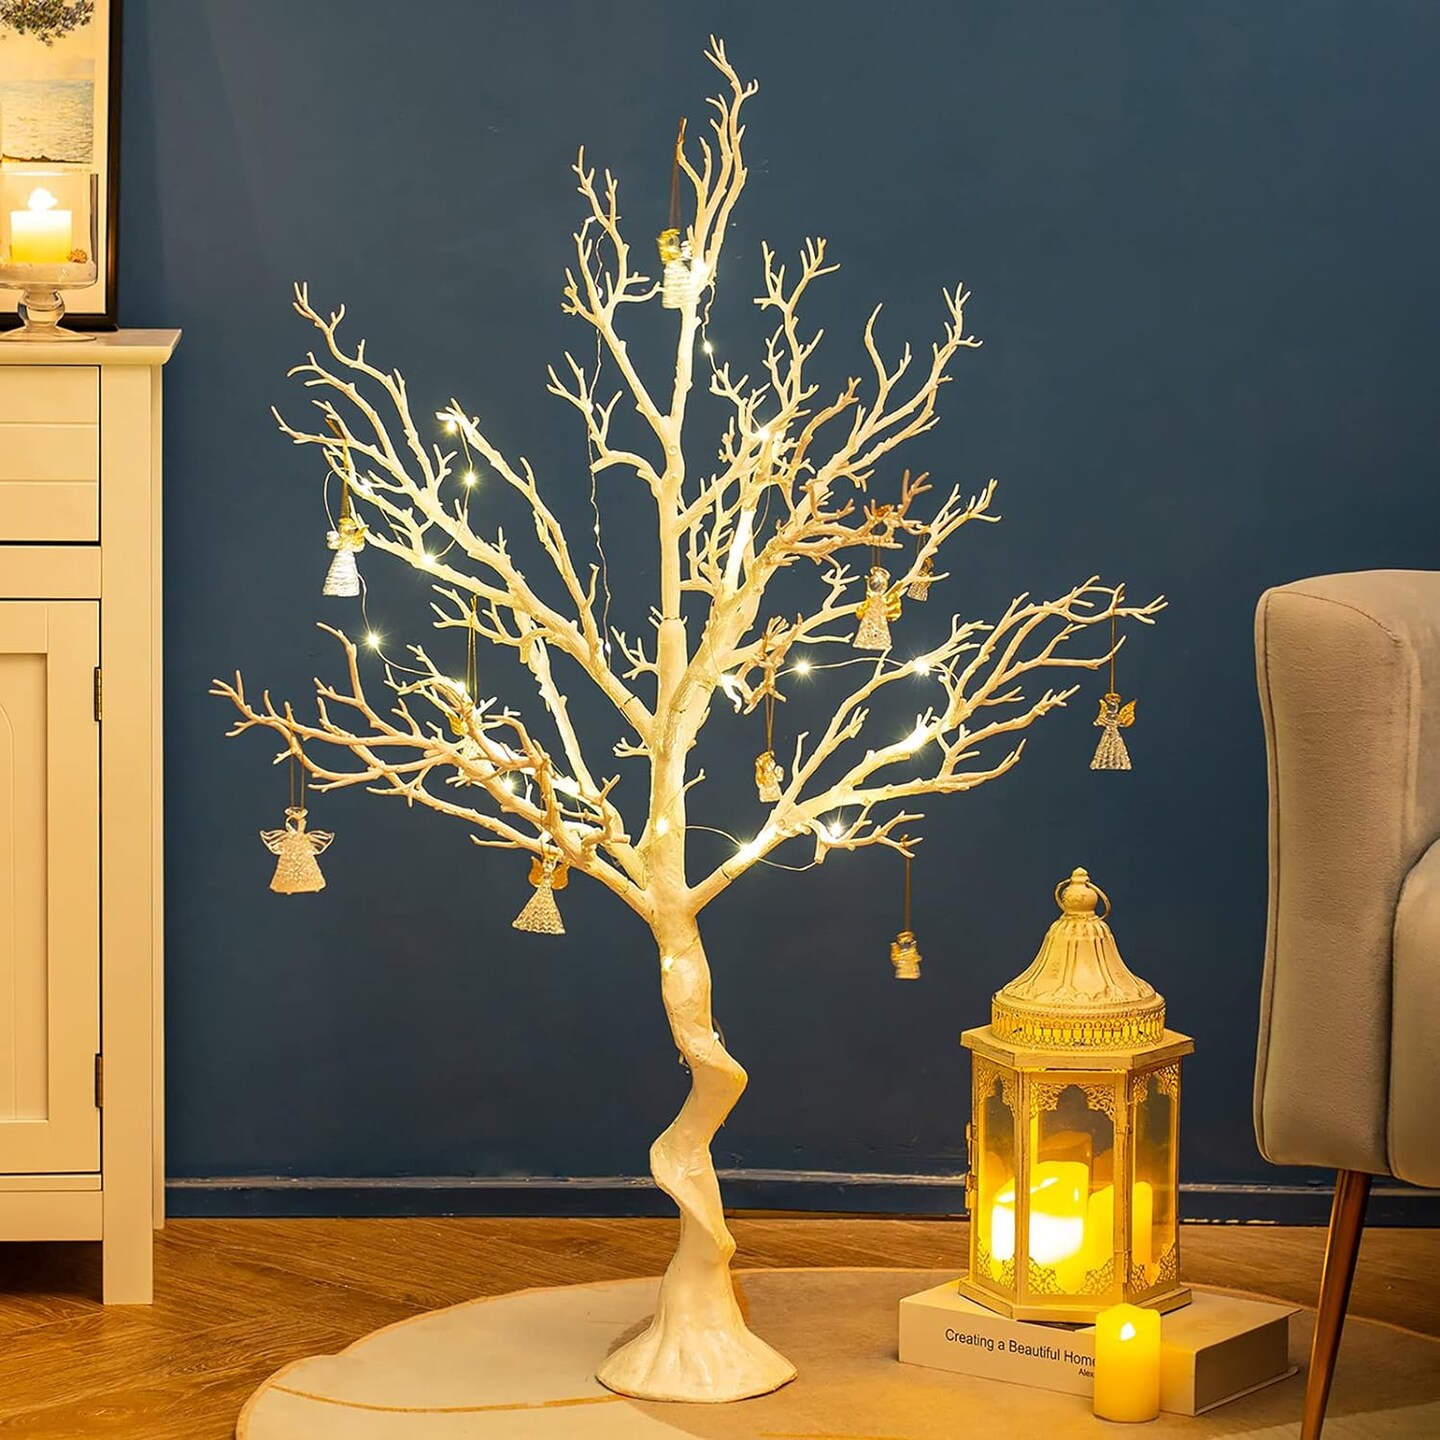 Ornament Display Tree: White Artificial Trees 3.4FT Tall Fake Decorative Manzanita Tree for Table Centerpiece Wedding Party Birthday Garden Christmas Decorations